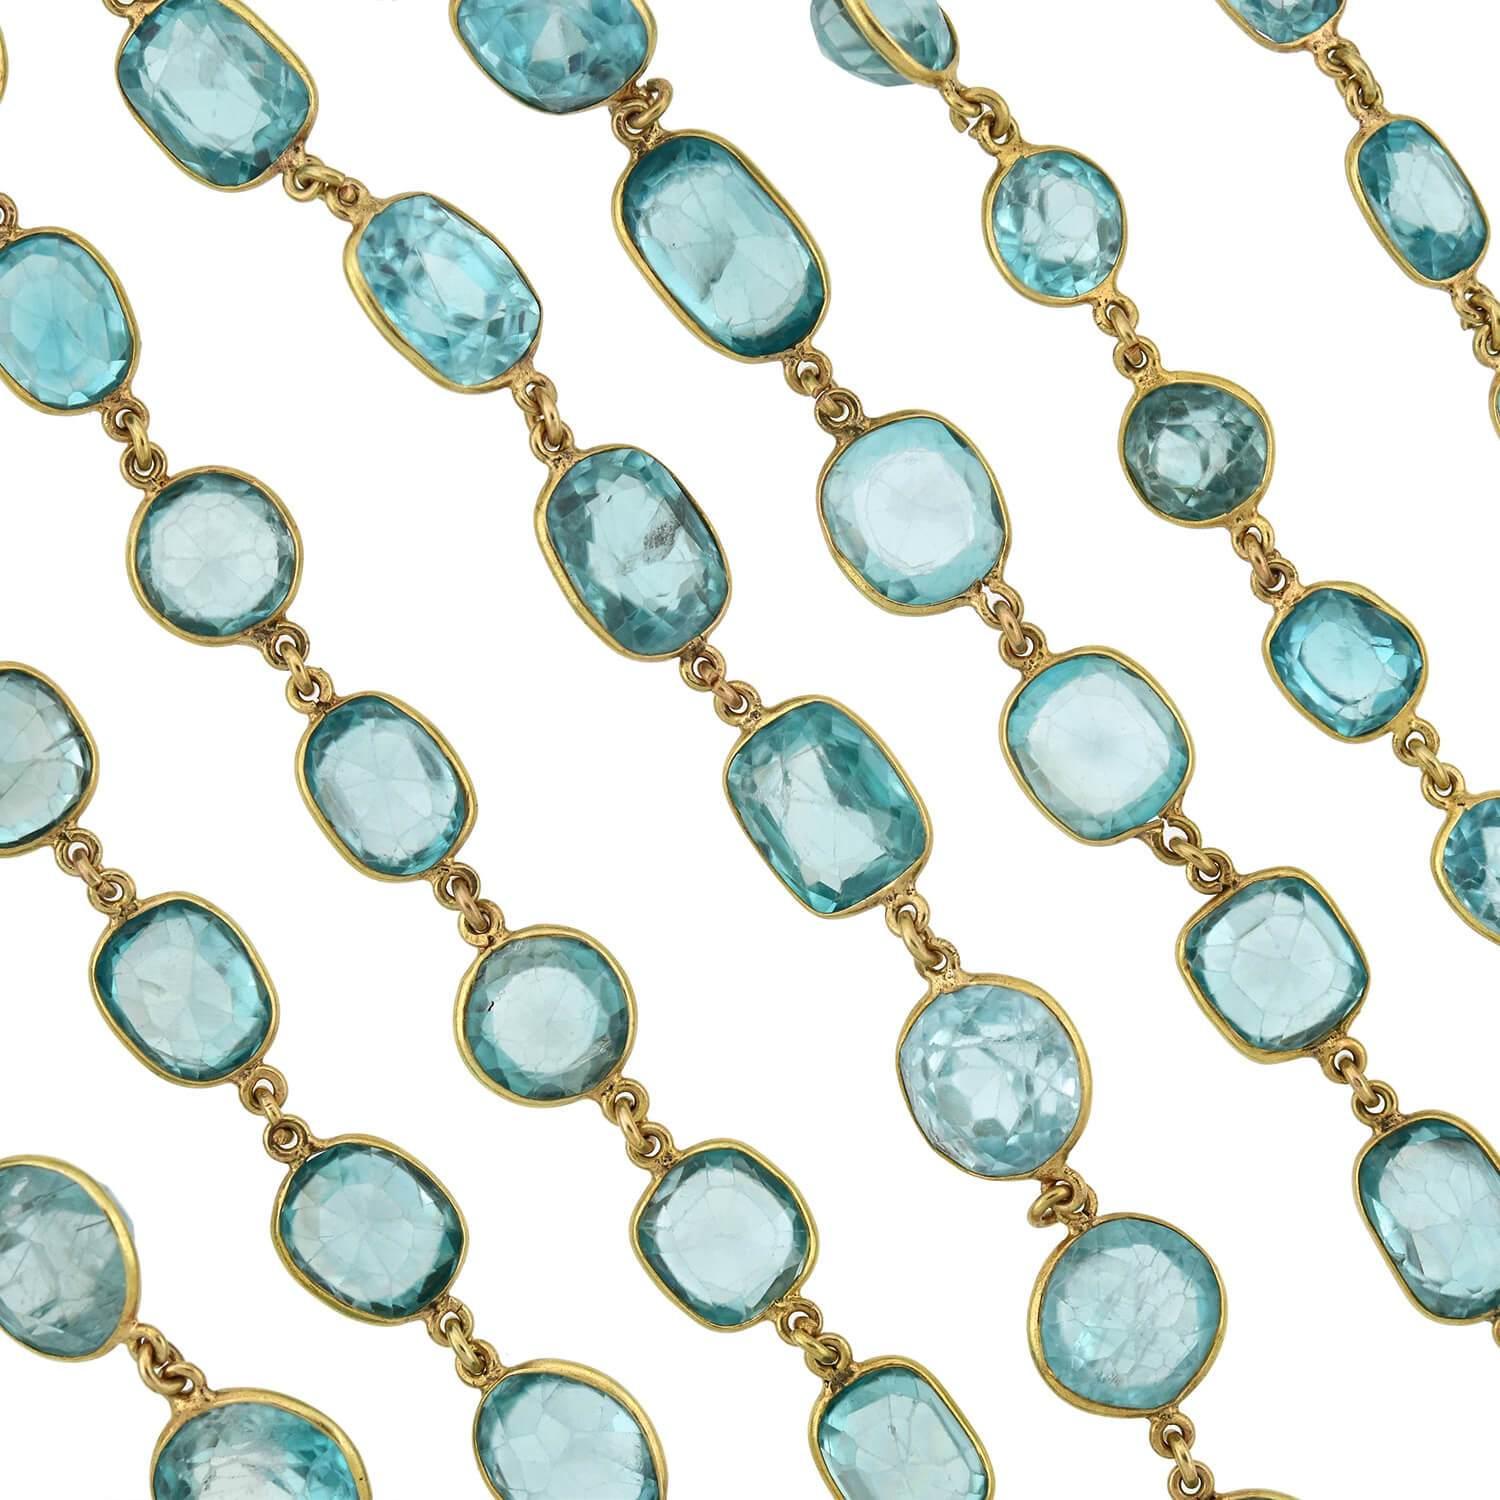 An absolutely exquisite blue zircon necklace from the Art Deco (ca1920s) era! Crafted in 14kt yellow gold, this stunning piece adorns 92 natural blue zircon stones, each separated by a delicate chain link. The sparkling stones graduate slightly in